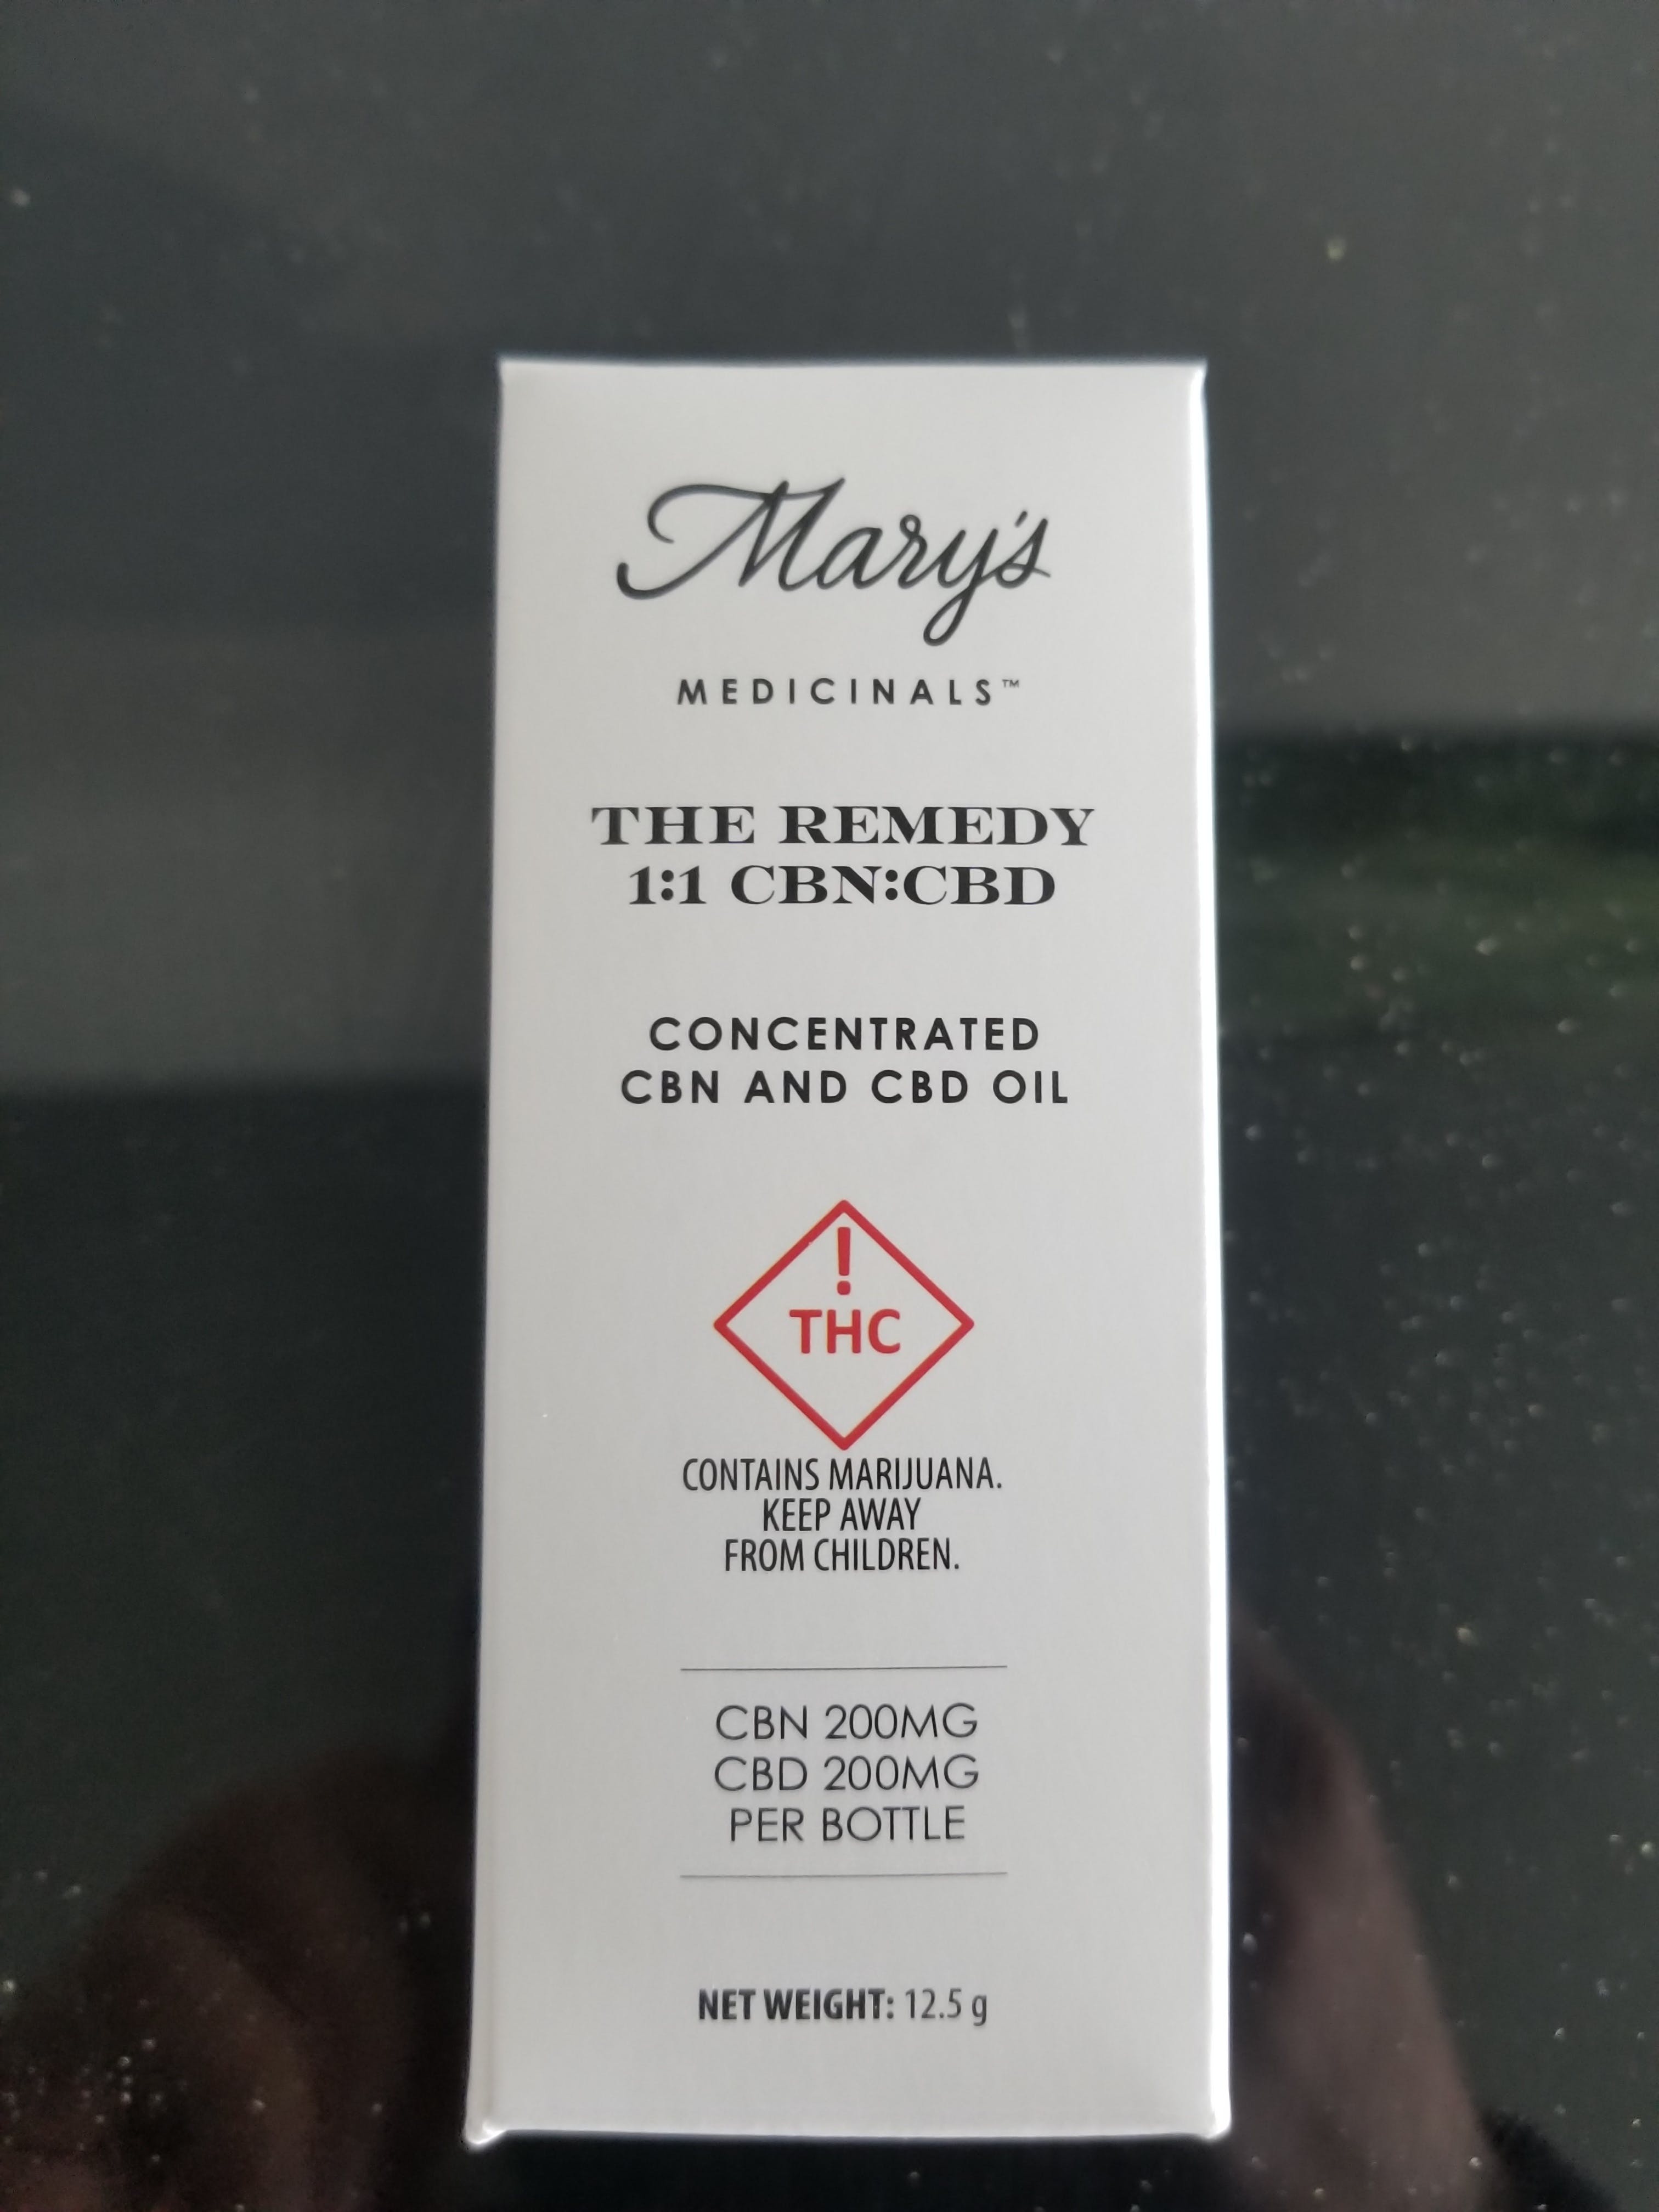 tincture-the-remedy-by-marys-medicinals-cbncbd-11-tincture